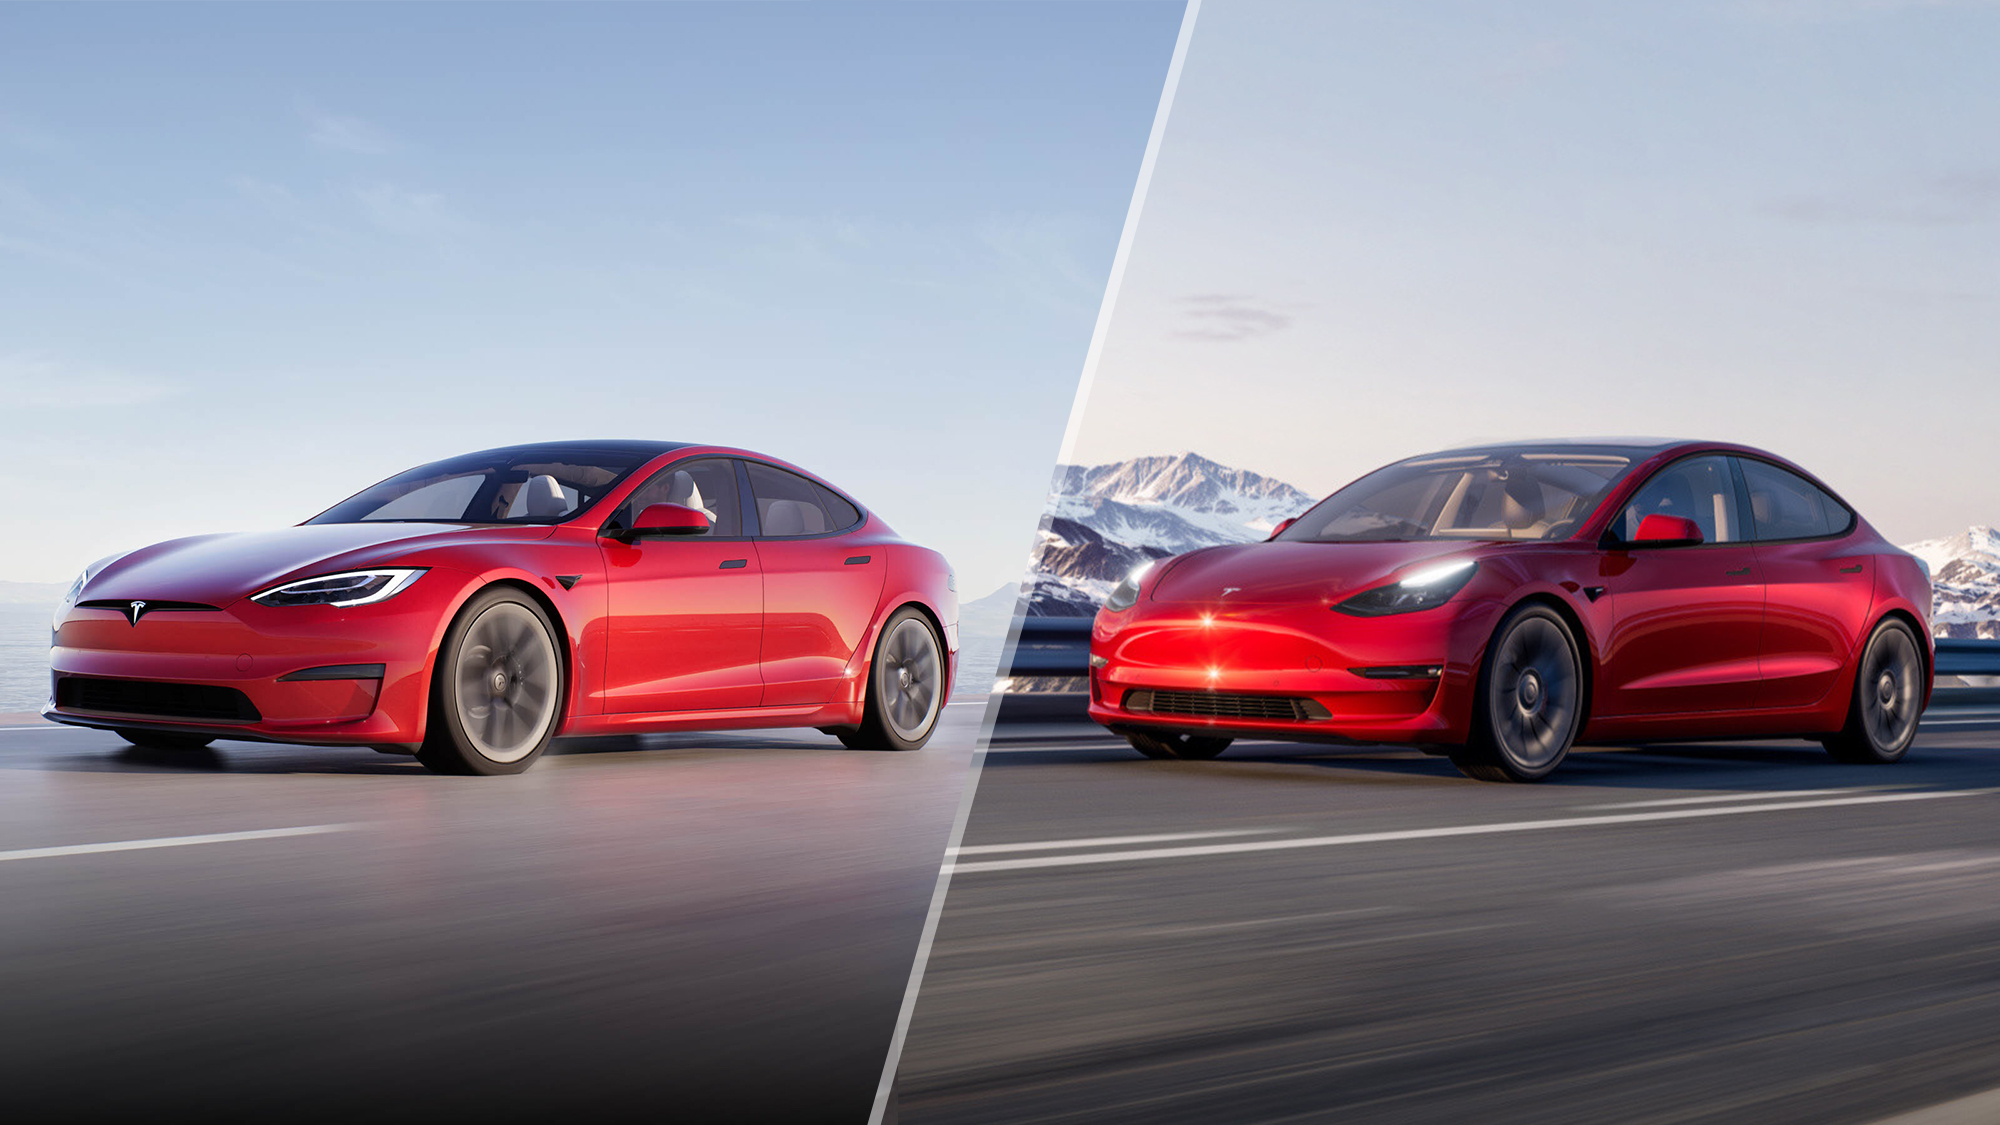 Tesla buying guide: Comparing Model 3 vs Model S and Model X - CNET